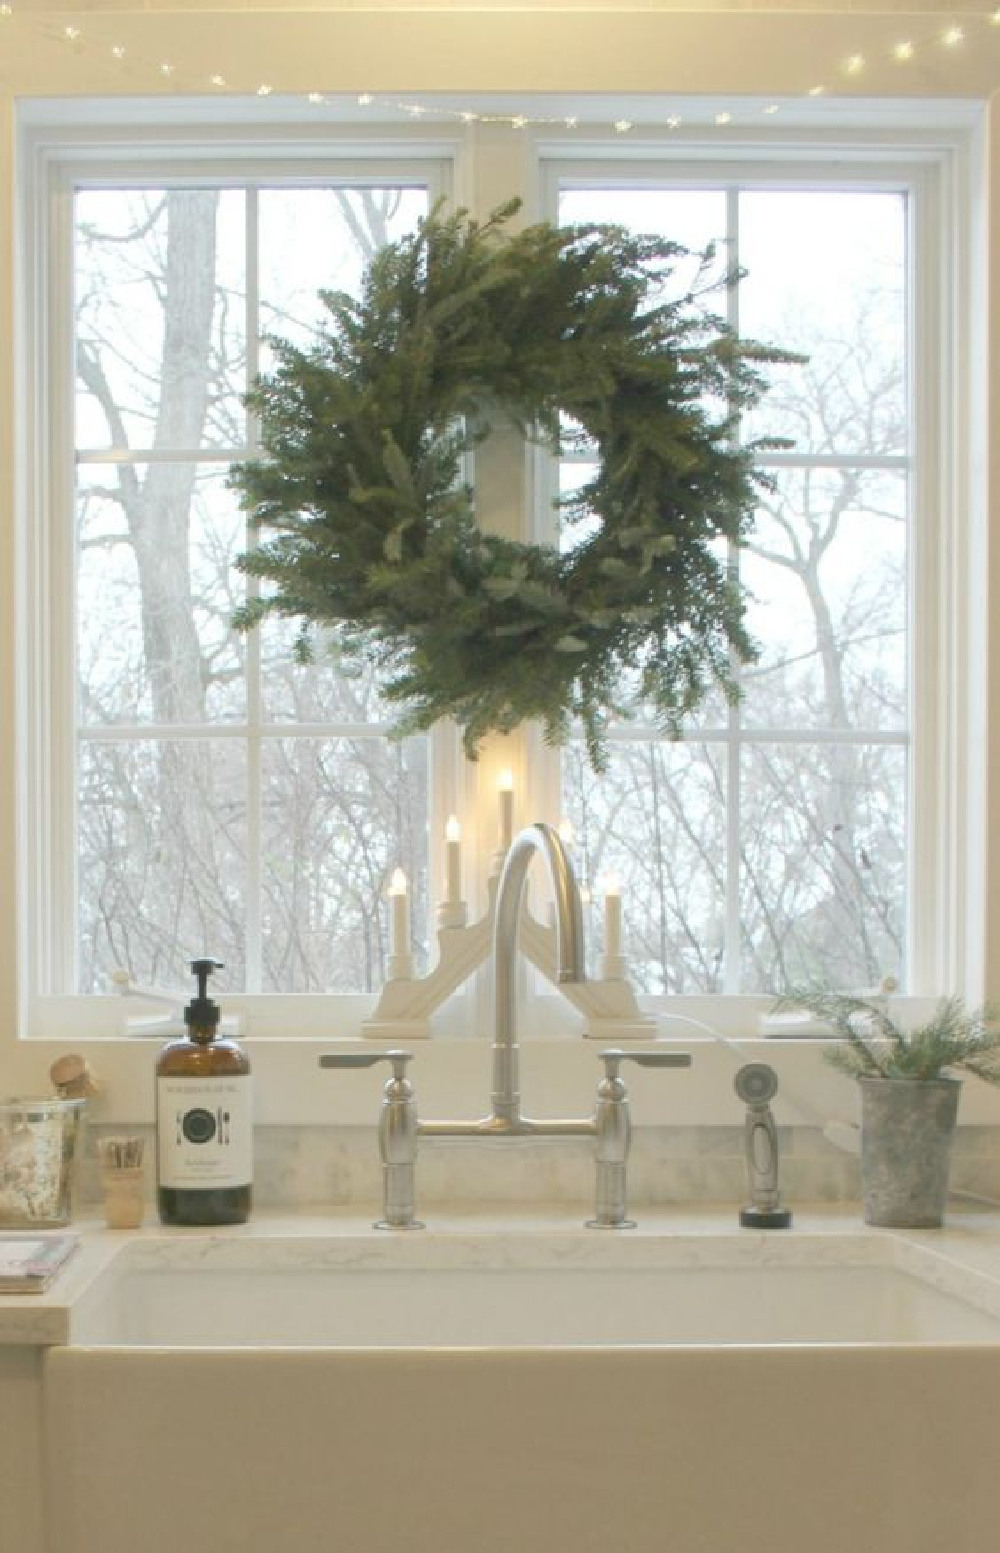 Scandinavian Christmas decor in my white kitchen with Swedish candelabra, fresh fir wreath, and fairy lights over farm sink window. #hellolovelystudio #christmasdecor #swedish #scandinavian #whitechristmas #nordicfrench